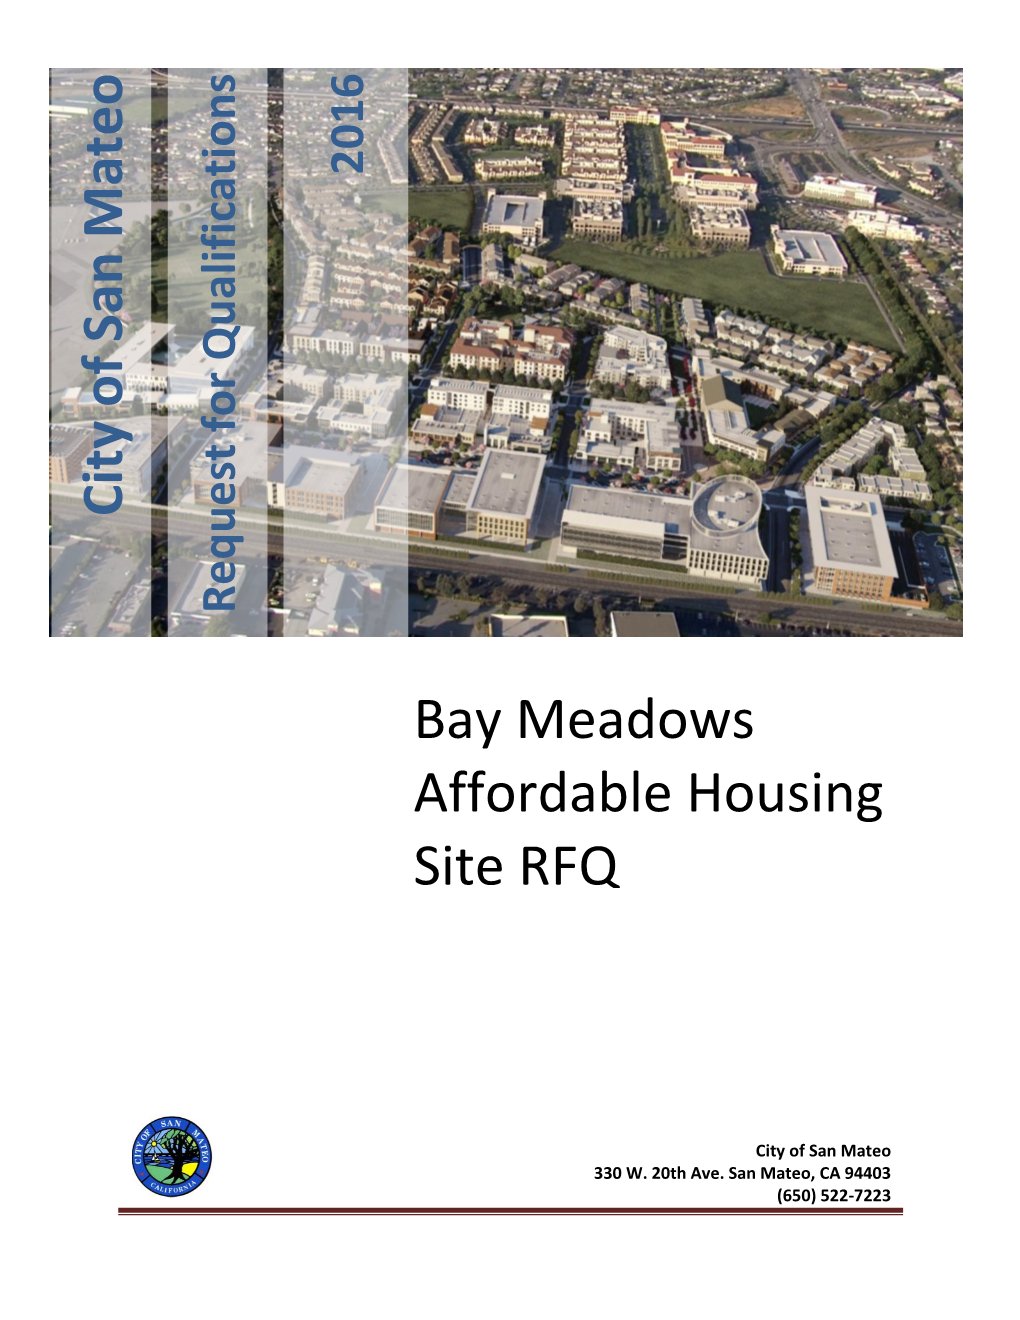 City of San Mateo Bay Meadows Affordable Housing Site